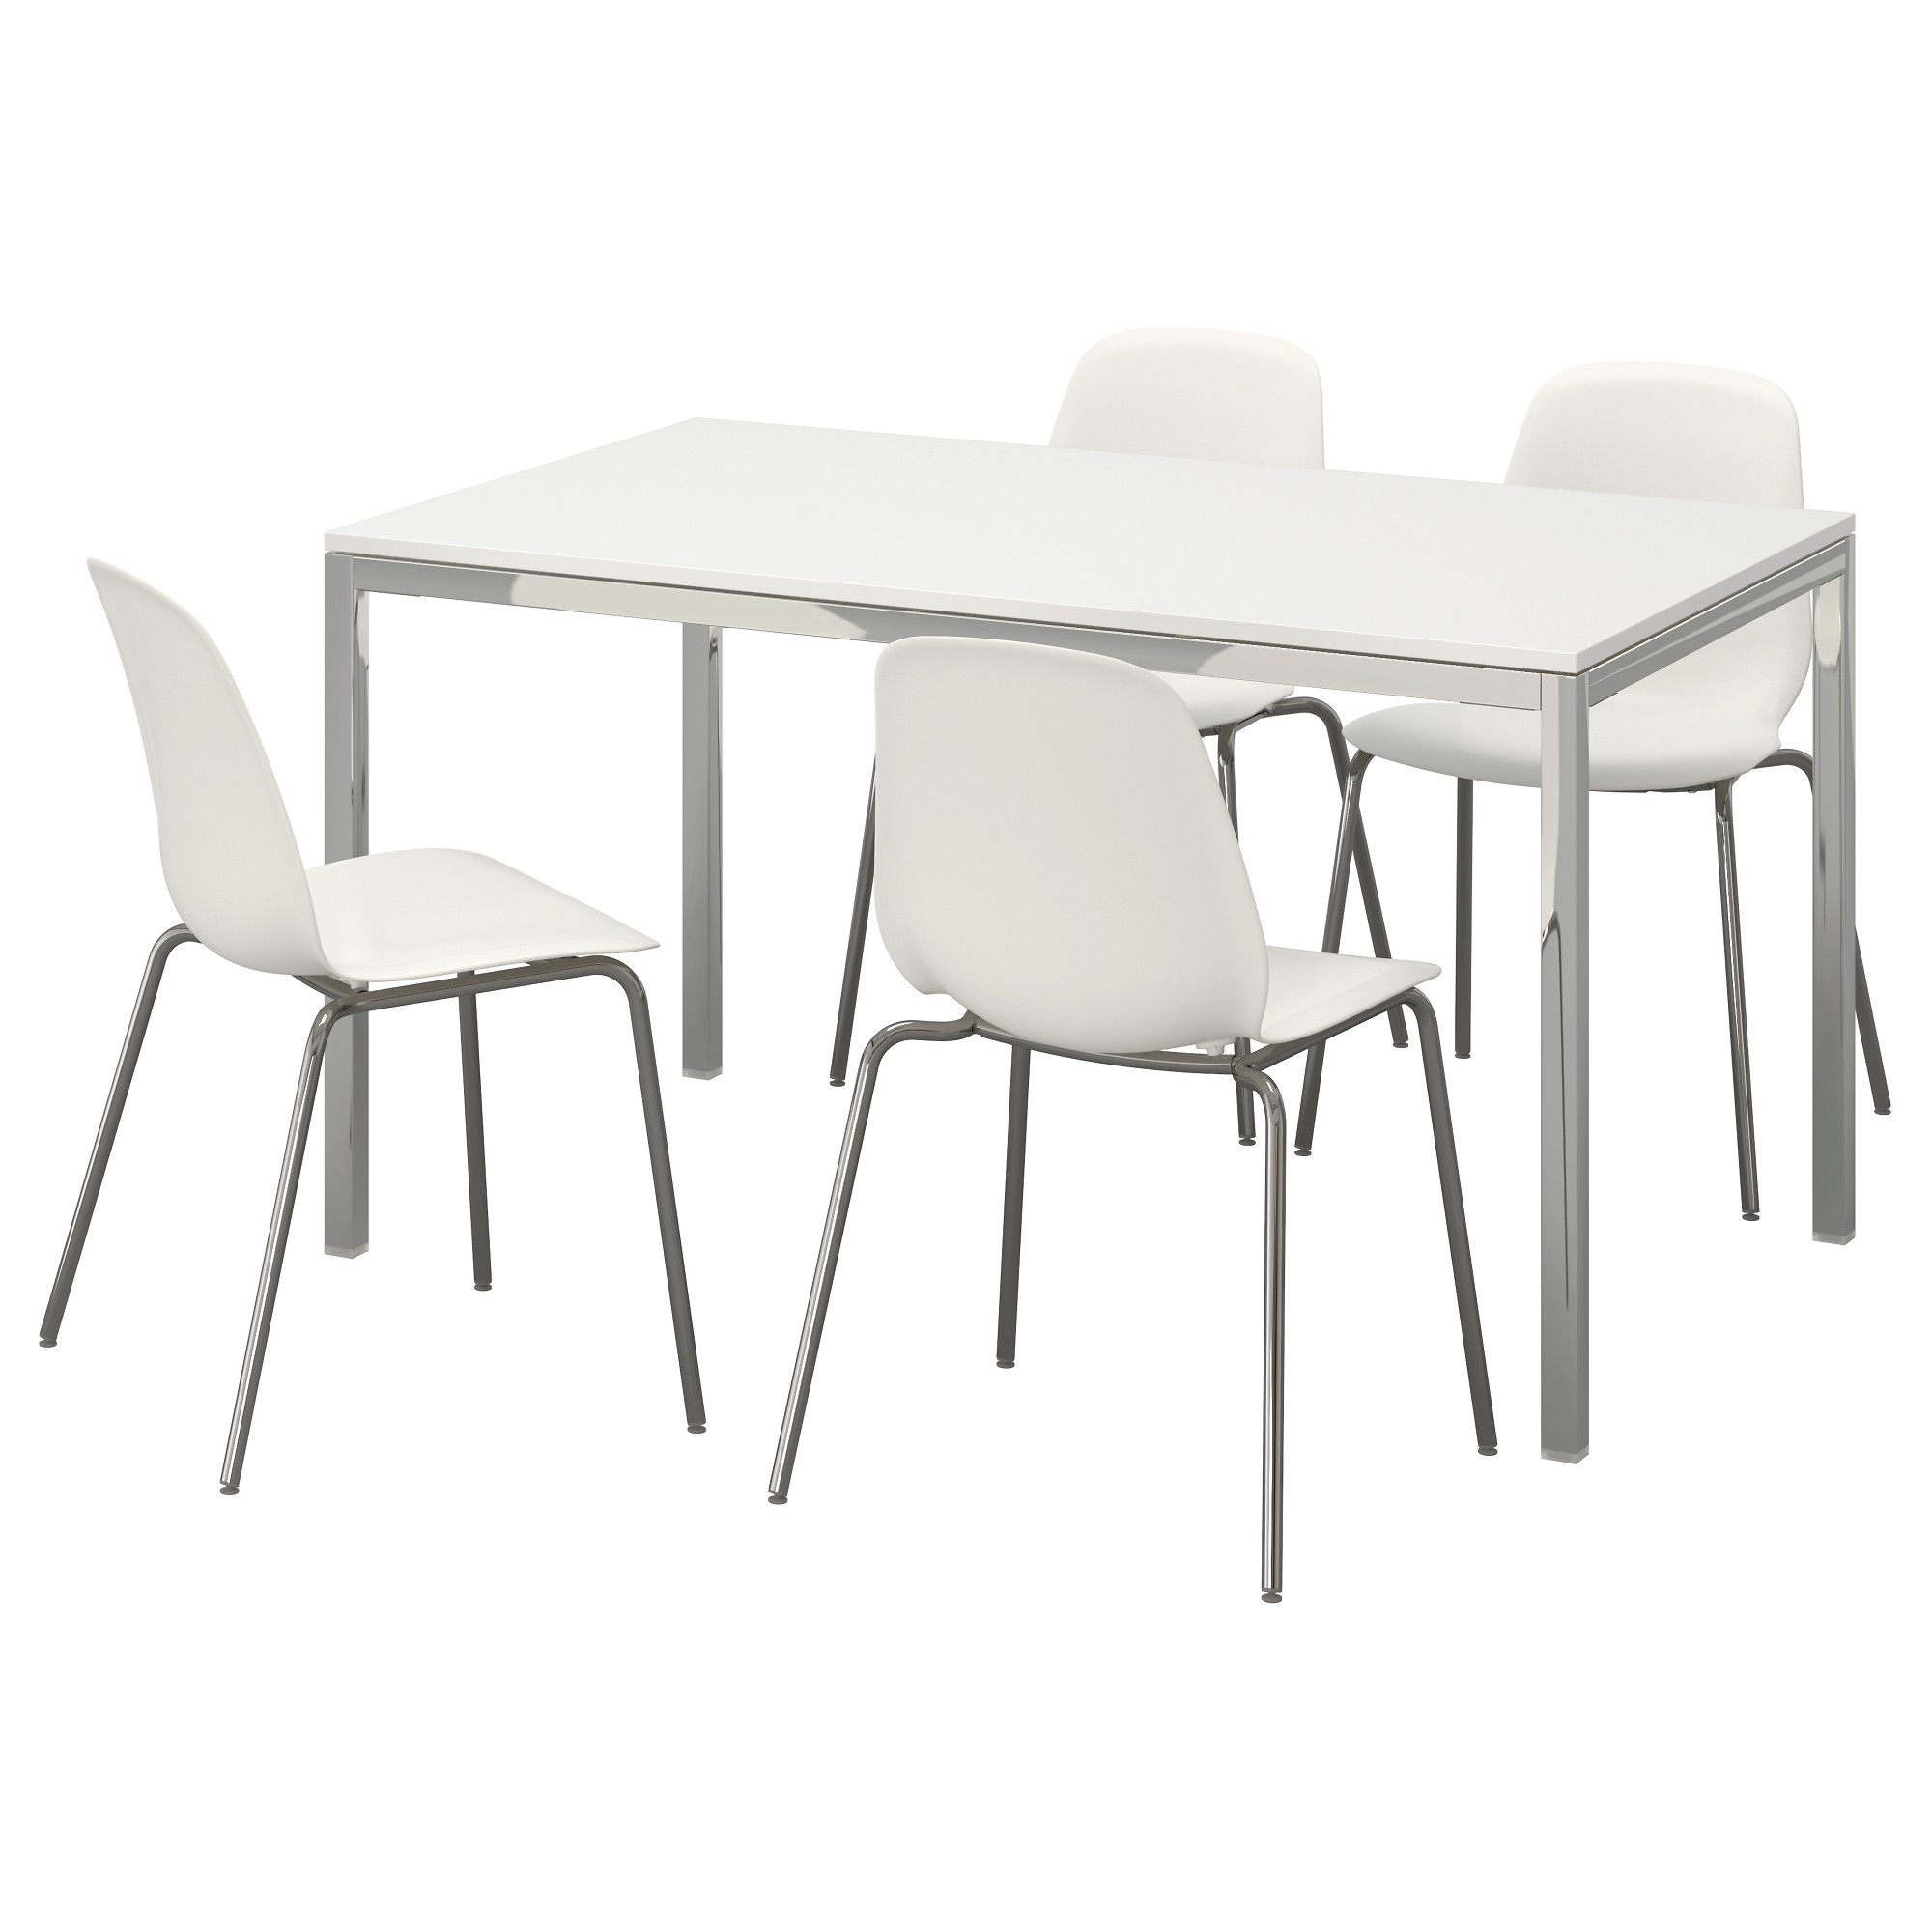 Torsby Leifarne Table And 4 Chairs High Gloss White White